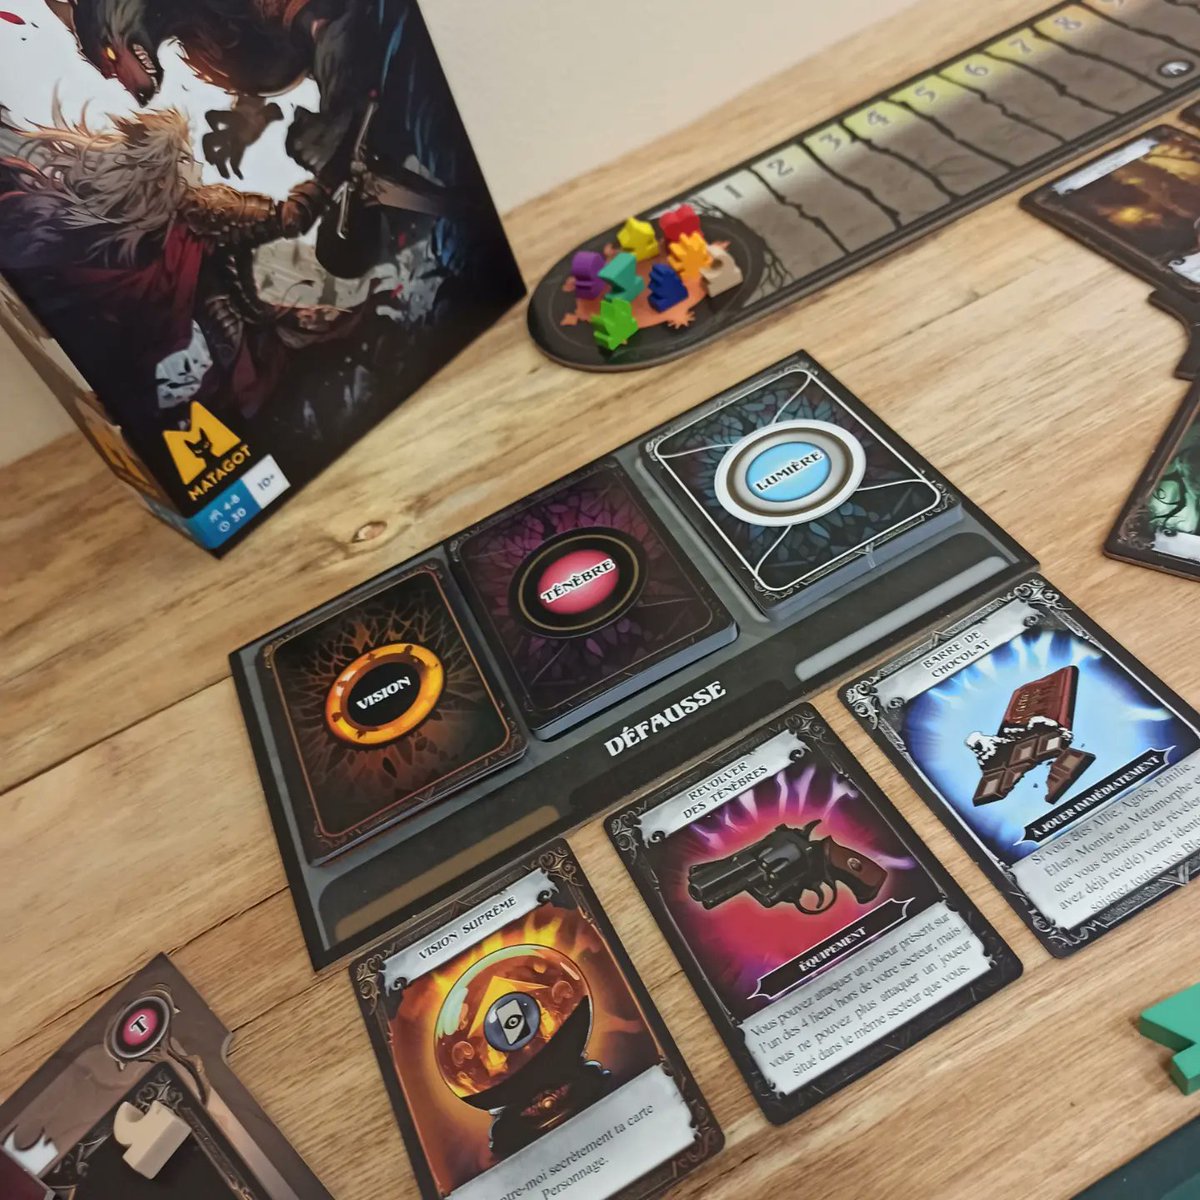 Shadow Hunters: Fangs is the newer version of the classic game, but unfortunately it's only published in french. @EditionsMatagot 

#boardgames #tabletops #juegodemesa #brettspiele #giocoditavolo #jogodetabuleiro #jeuxdesociete #geek #boardgame